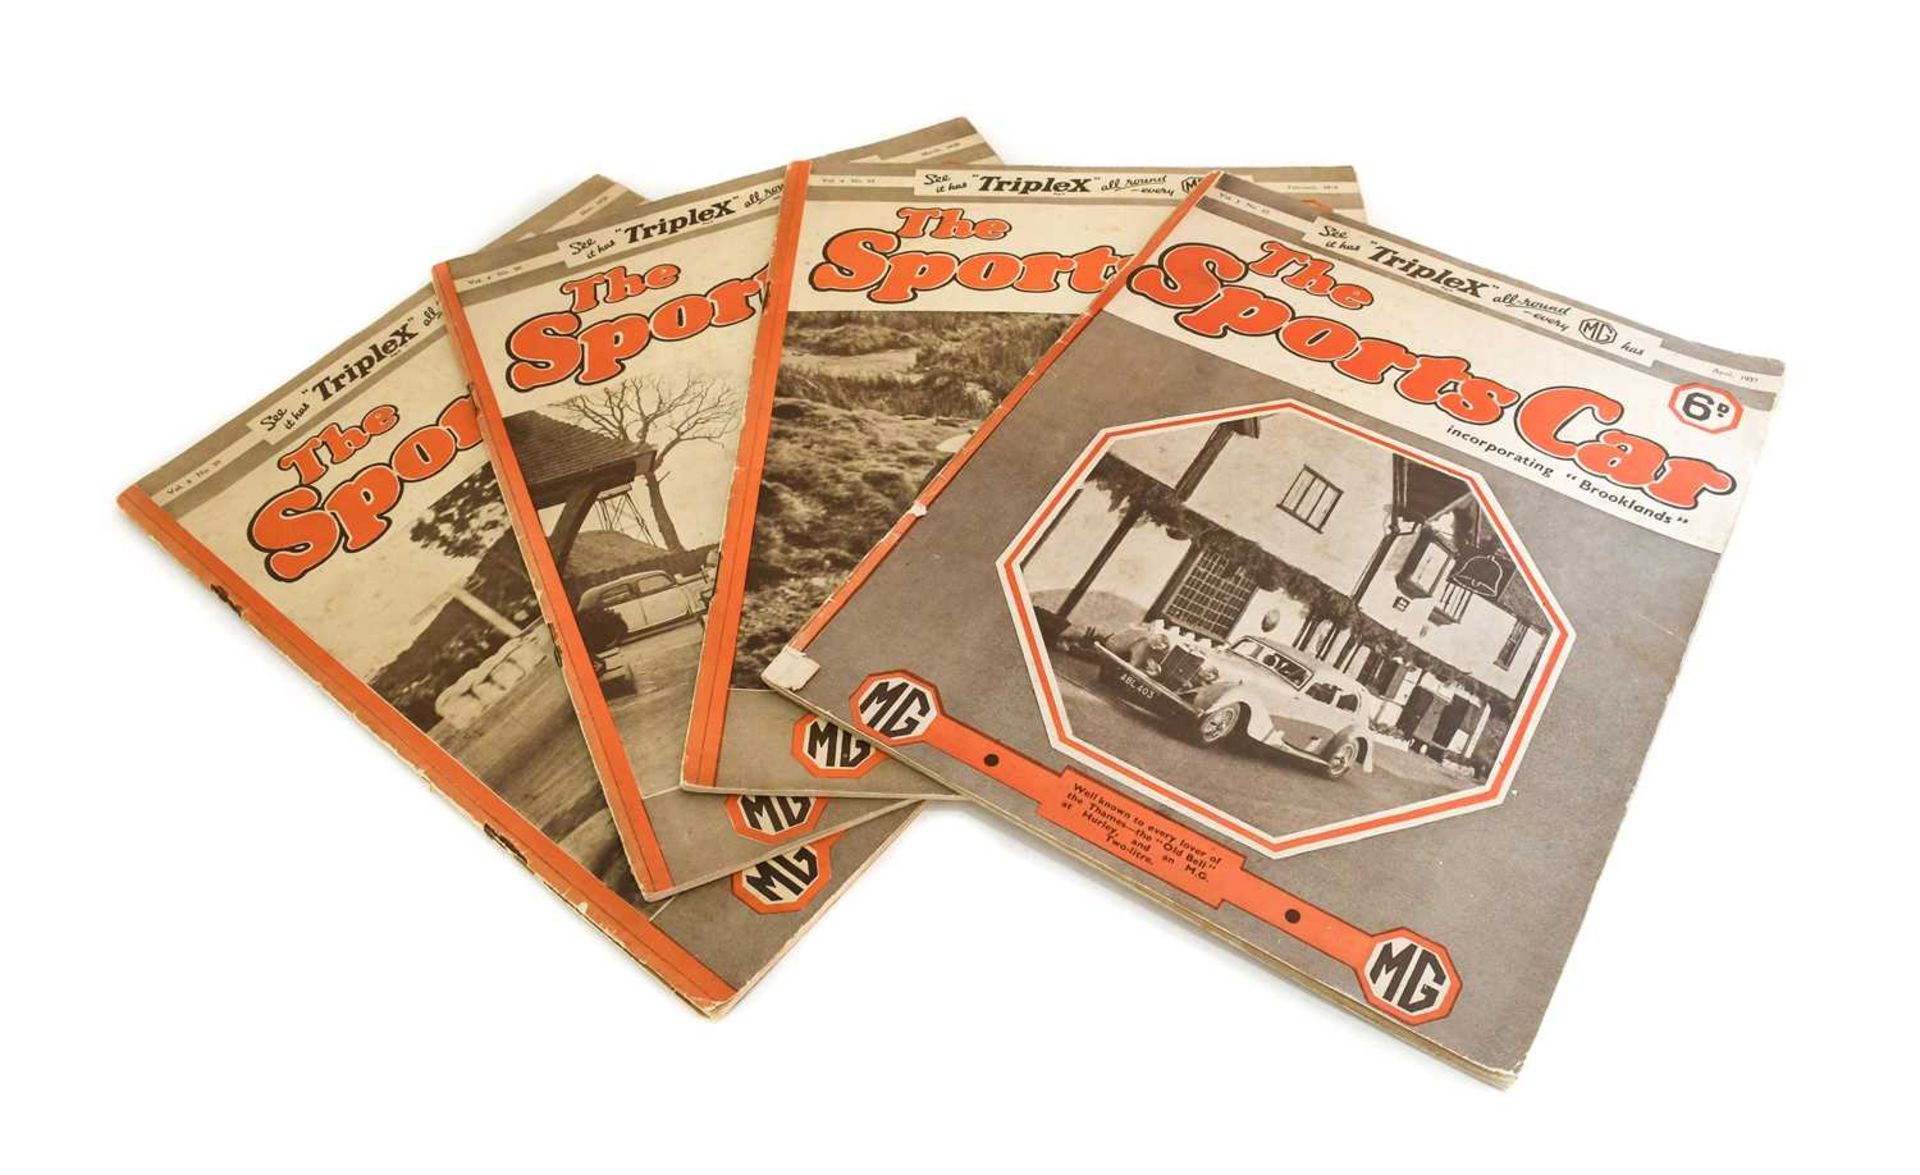 Four Copies of "The Sports Car" Magazine incorporating Brooklands, issues February to May 1938